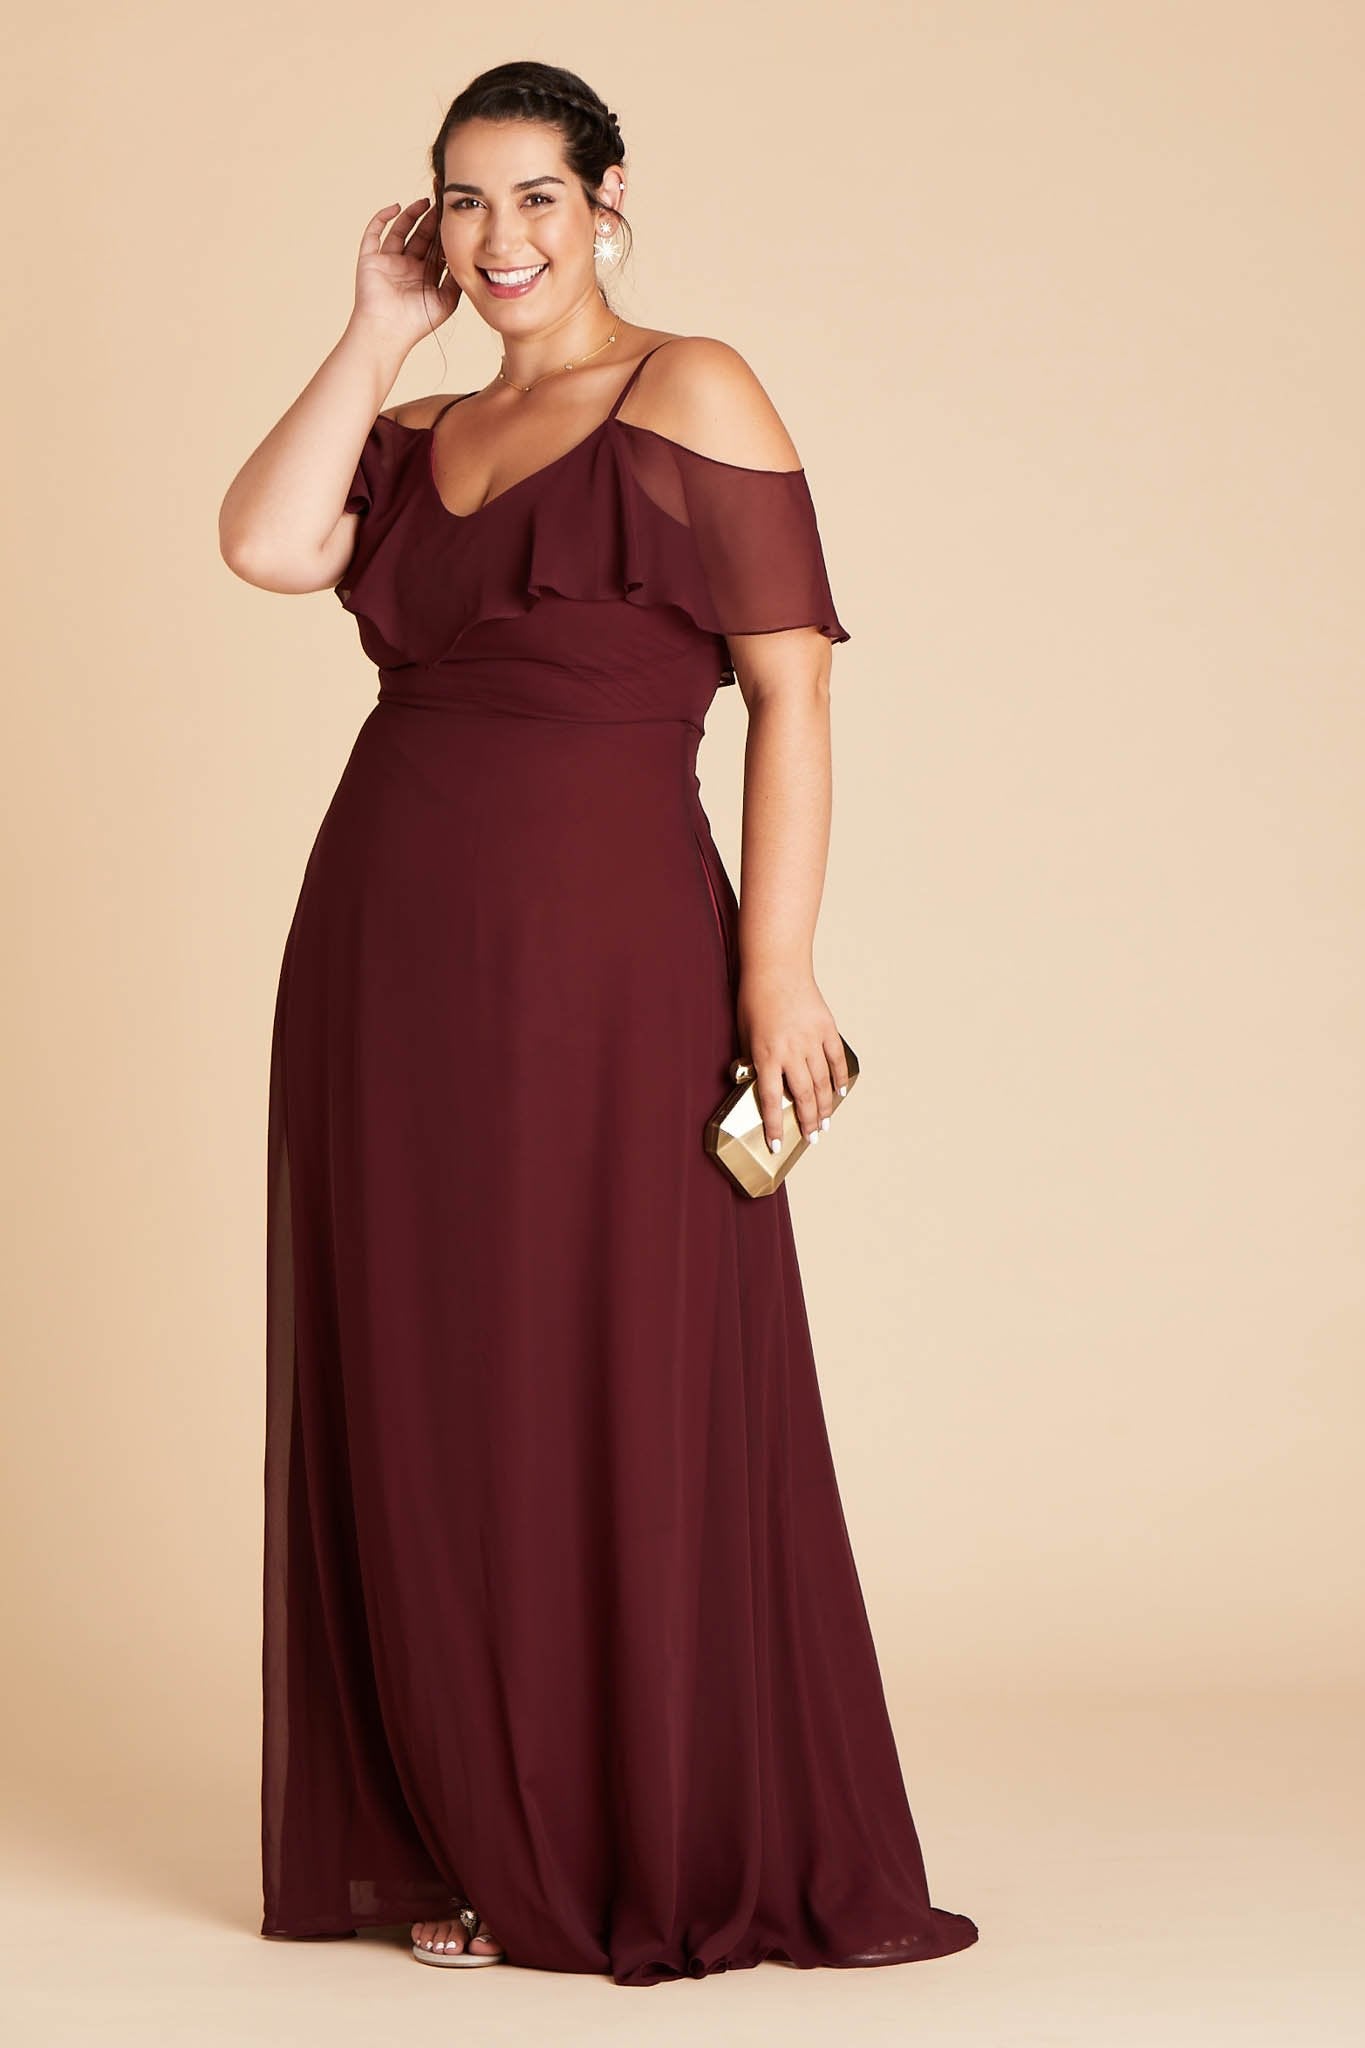 Jane convertible plus size bridesmaid dress in Cabernet Burgundy chiffon by Birdy Grey, side view